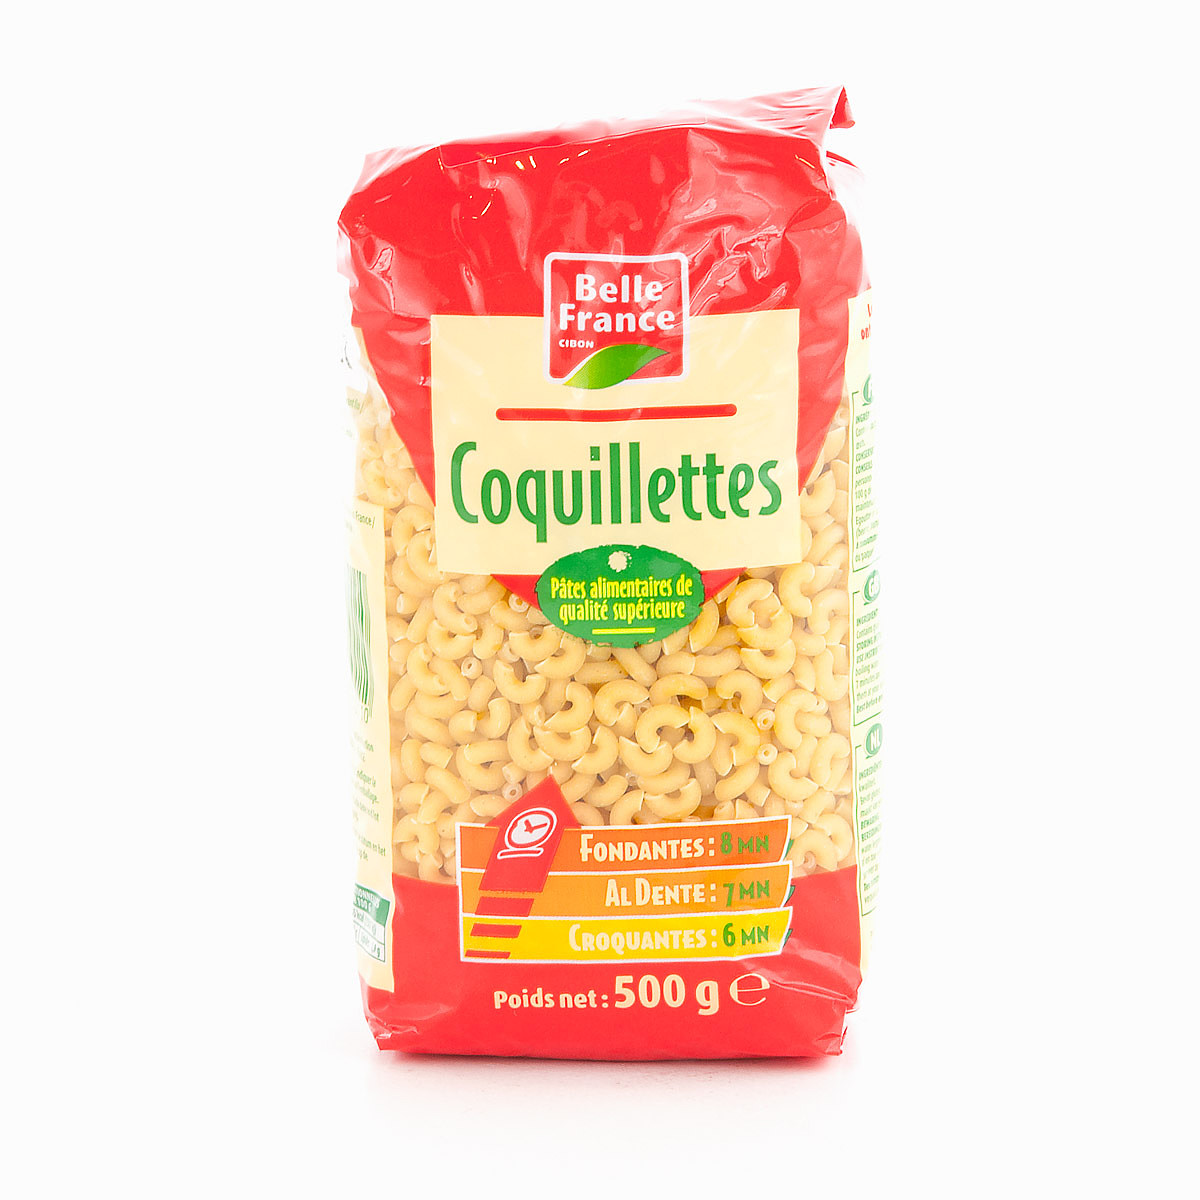 COQUILLETTES 500G. BF